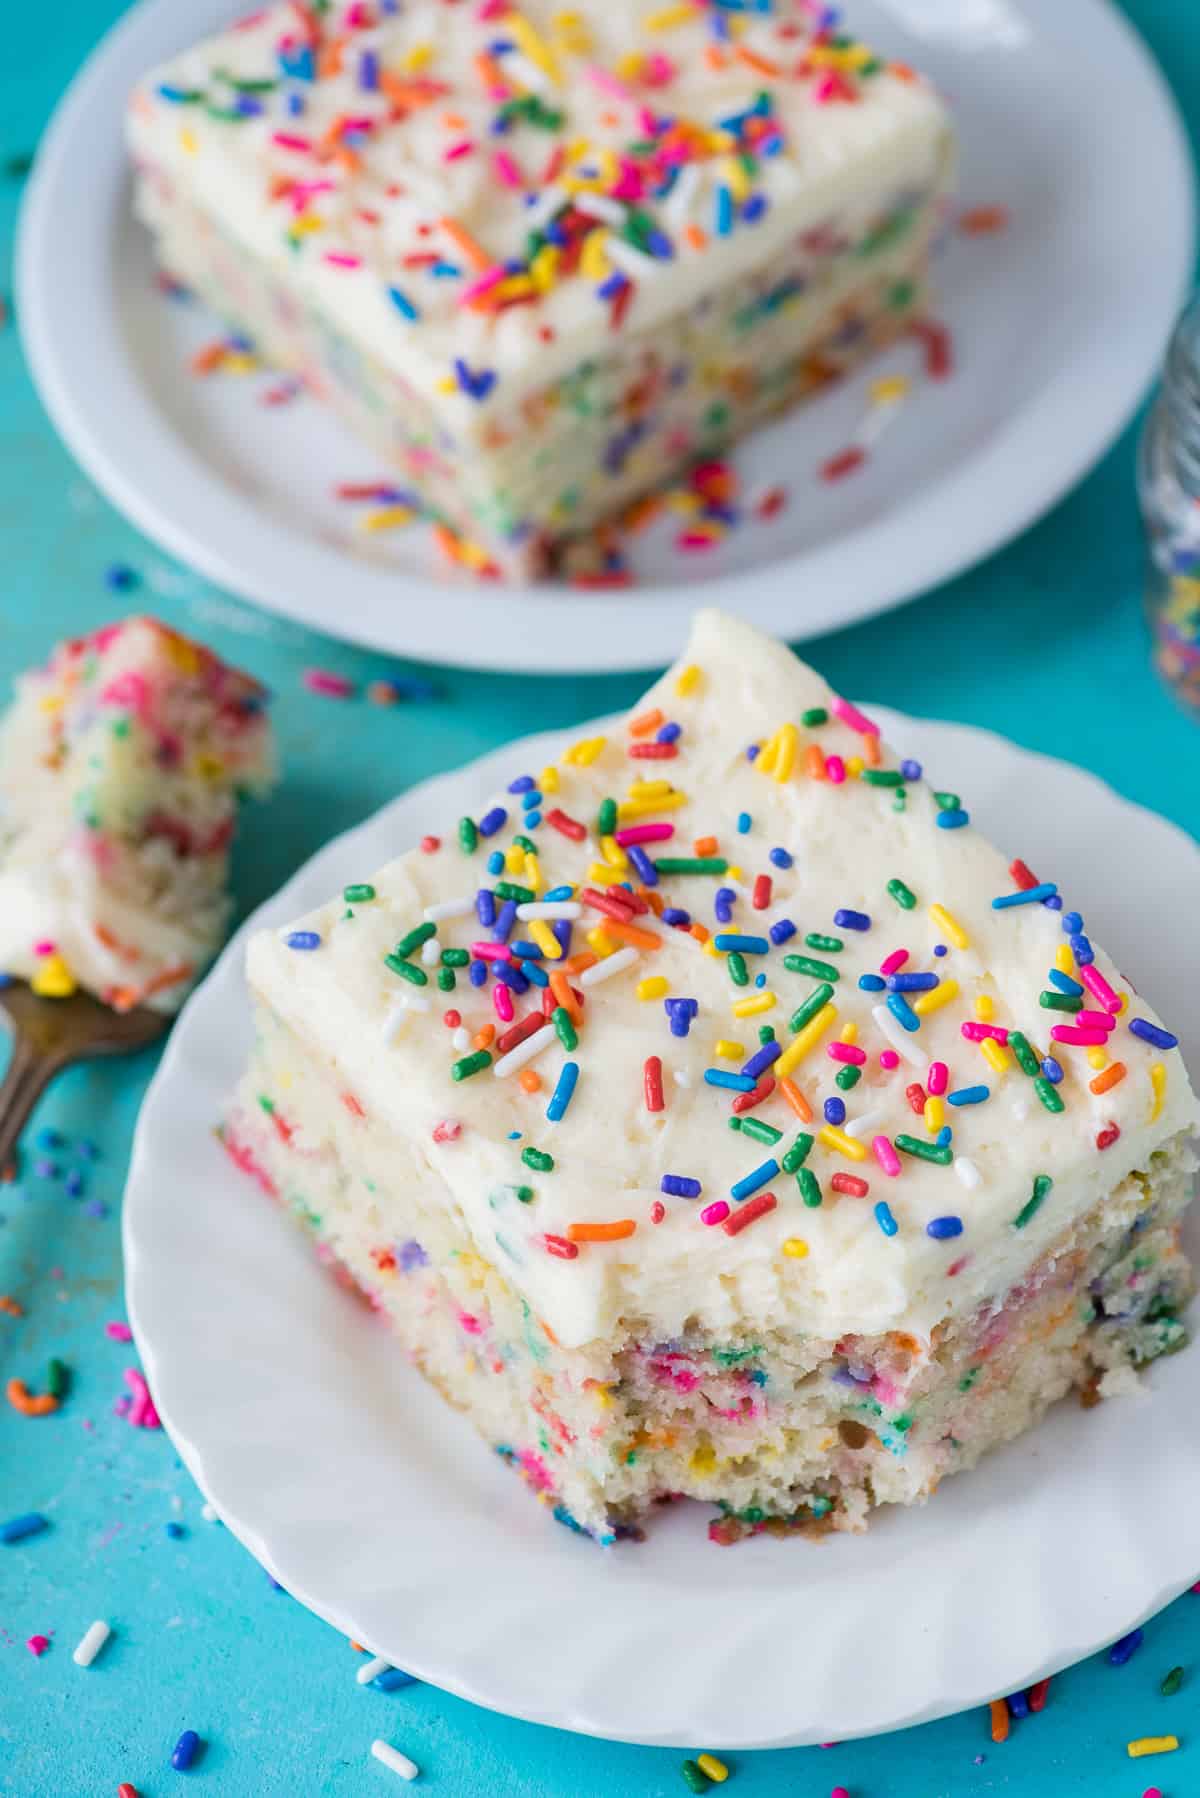 two pieces of funfetti cake on white plates on teal background